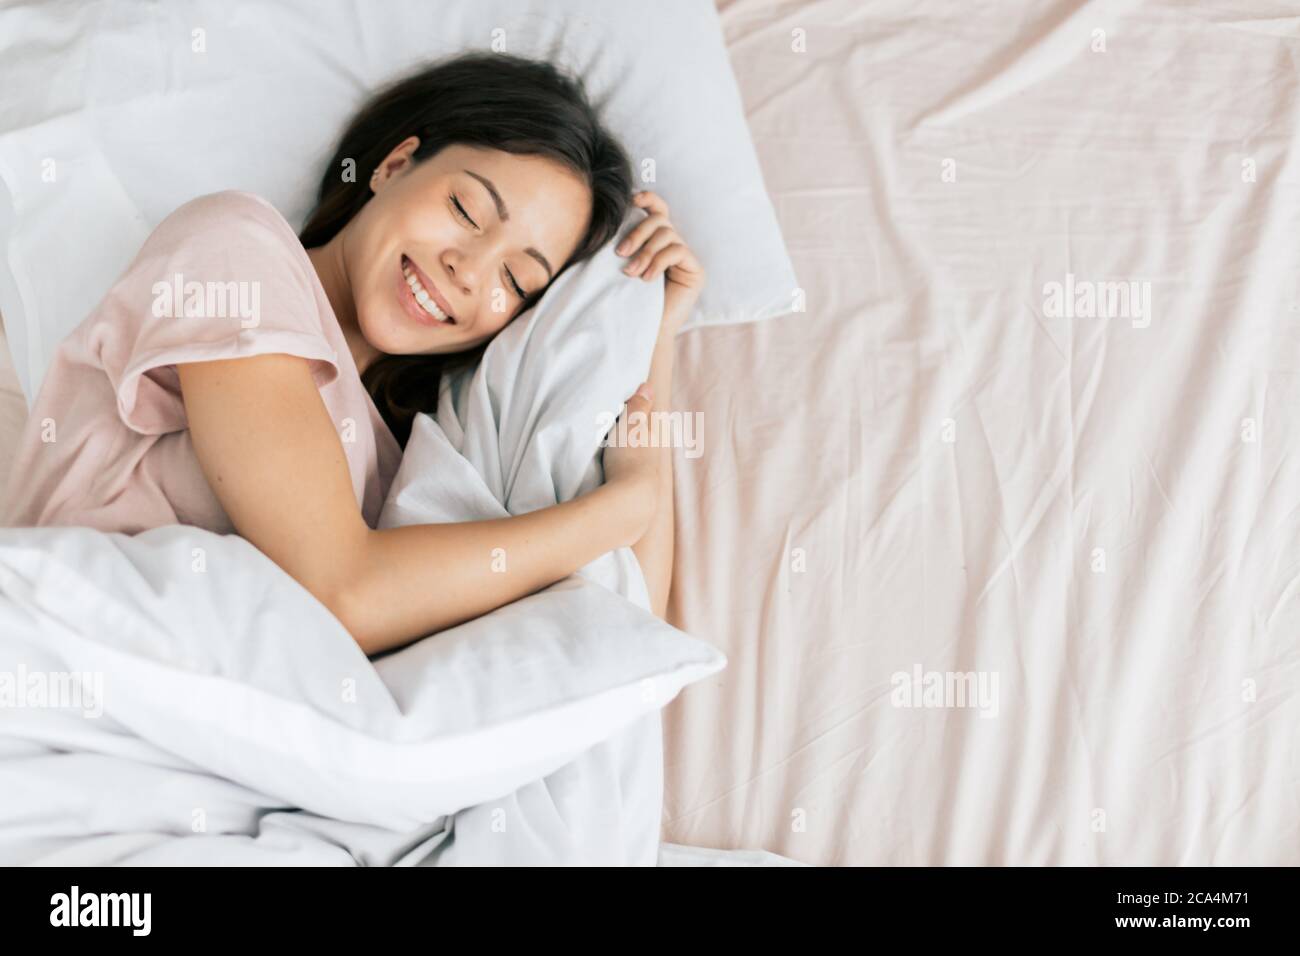 nice girl is laughing while sleeping, top view phoro. copy space. Stock Photo